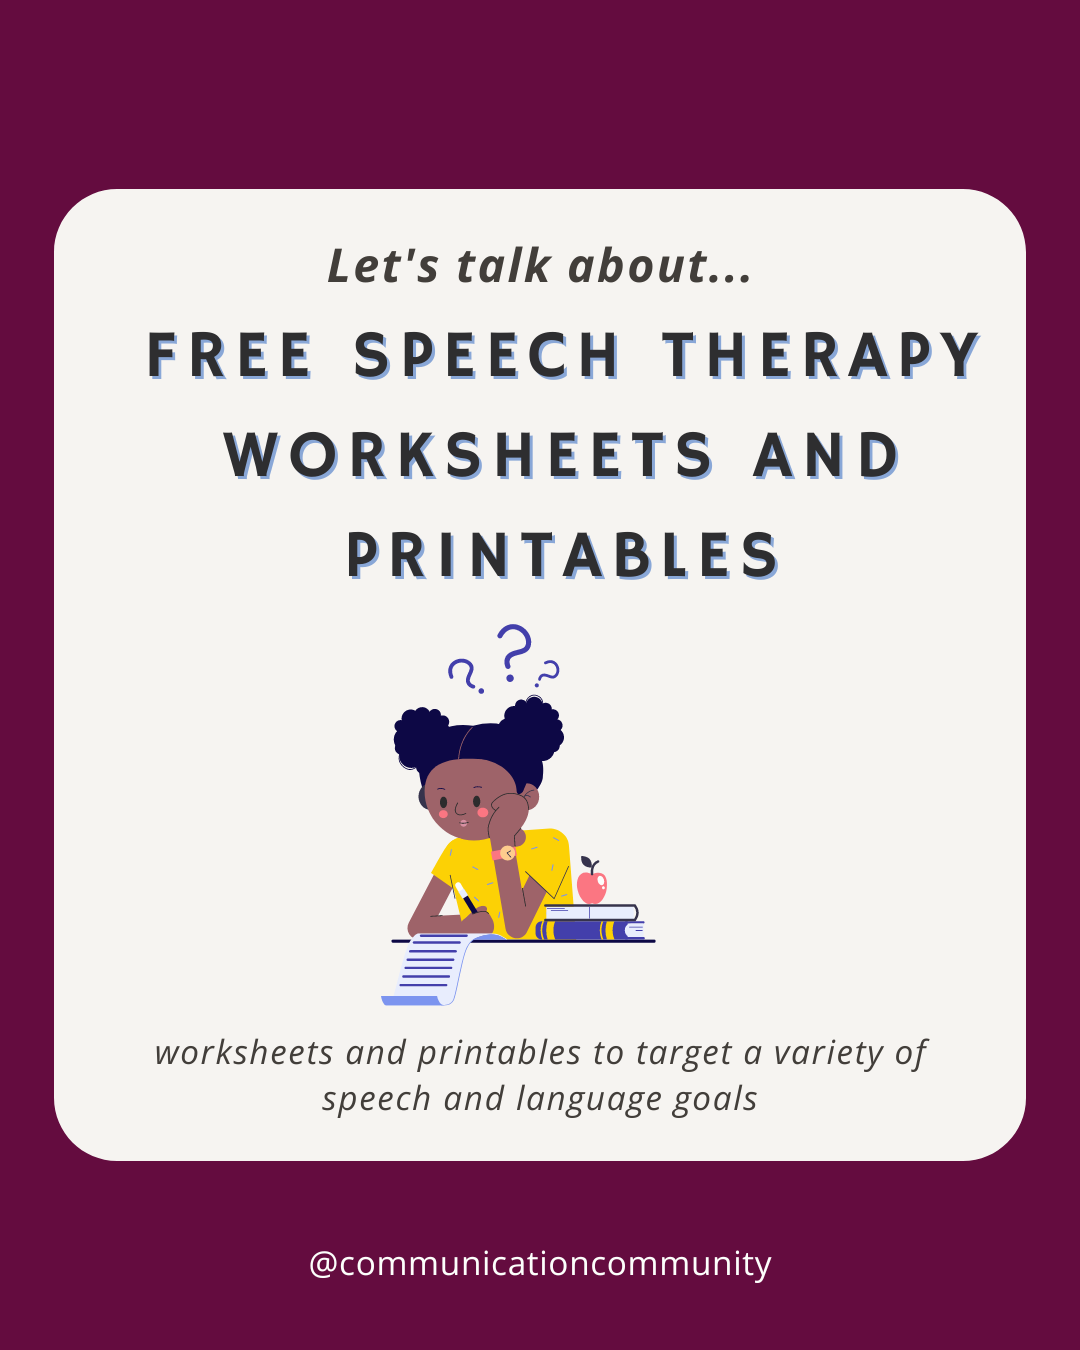 FREE Speech Therapy Worksheets and Printables